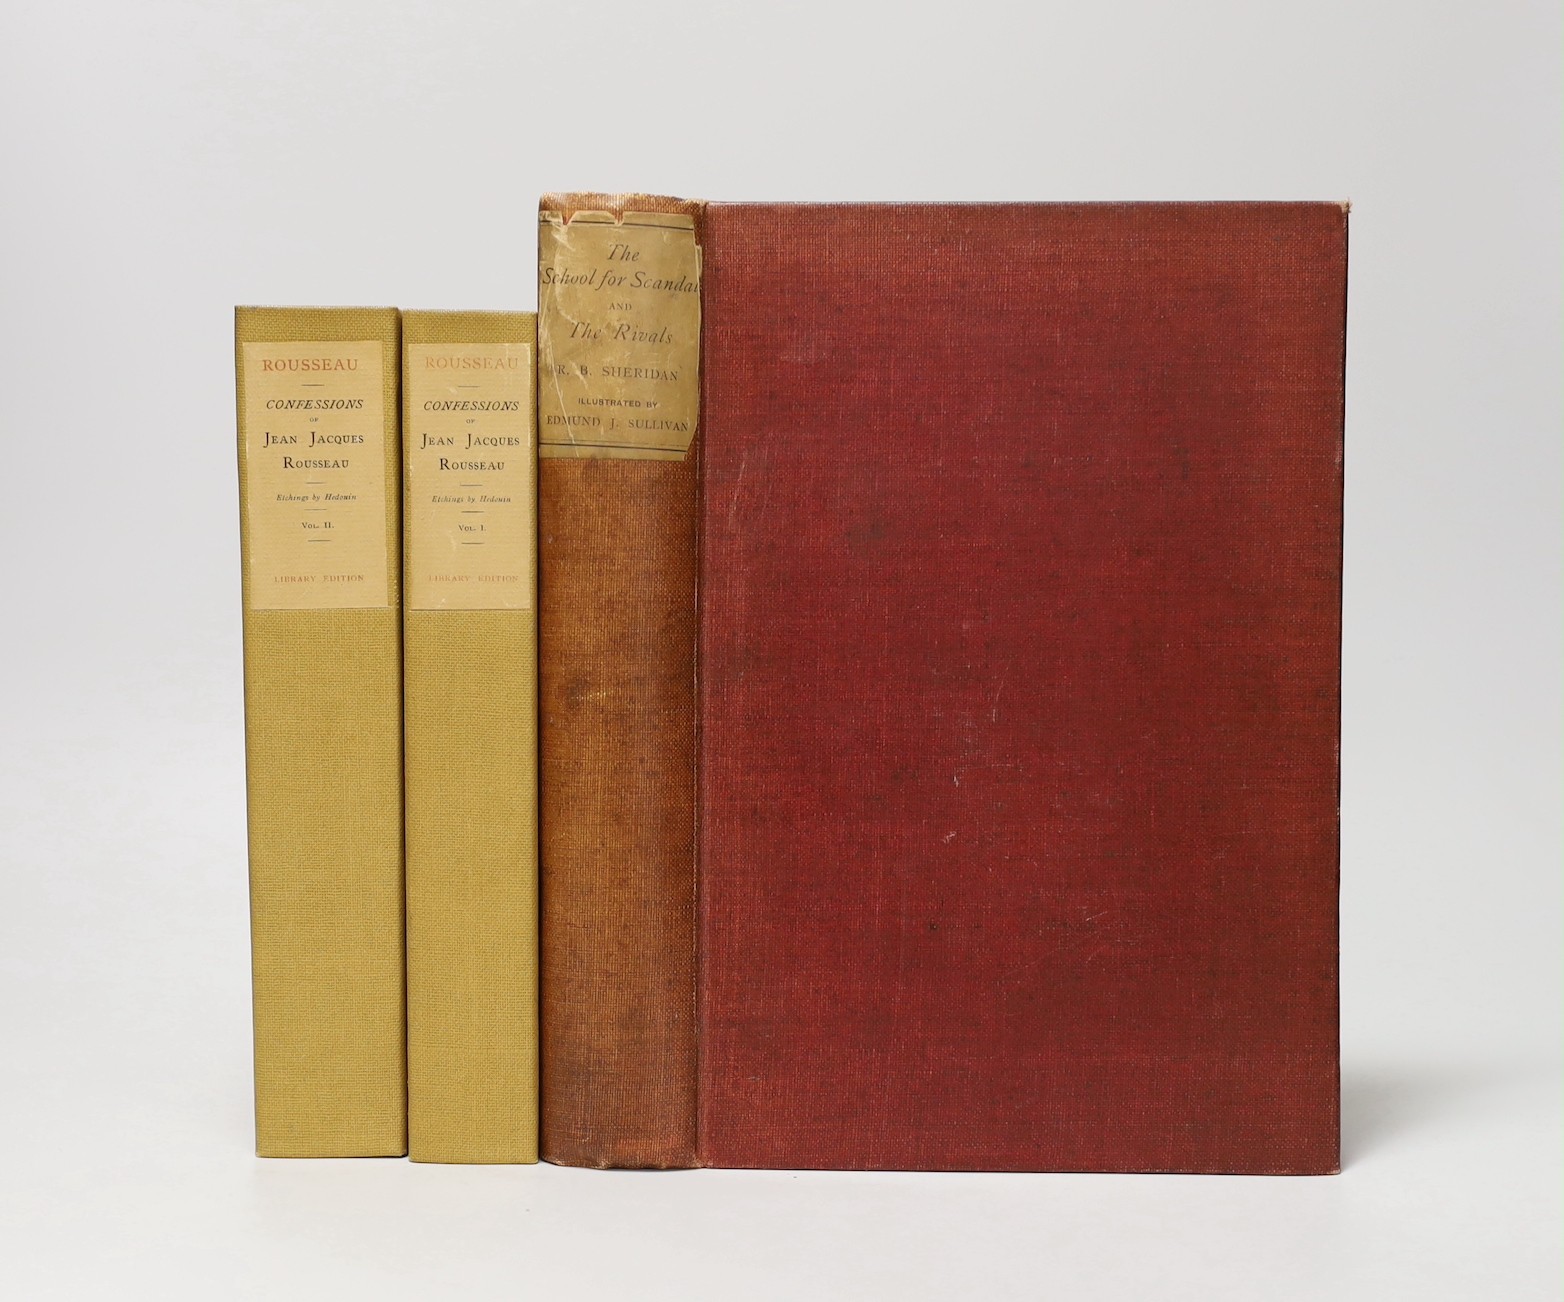 Edmund J Sullivan - The School for Scandals… and two volumes of Confessions of Jean Jacques Rousseau